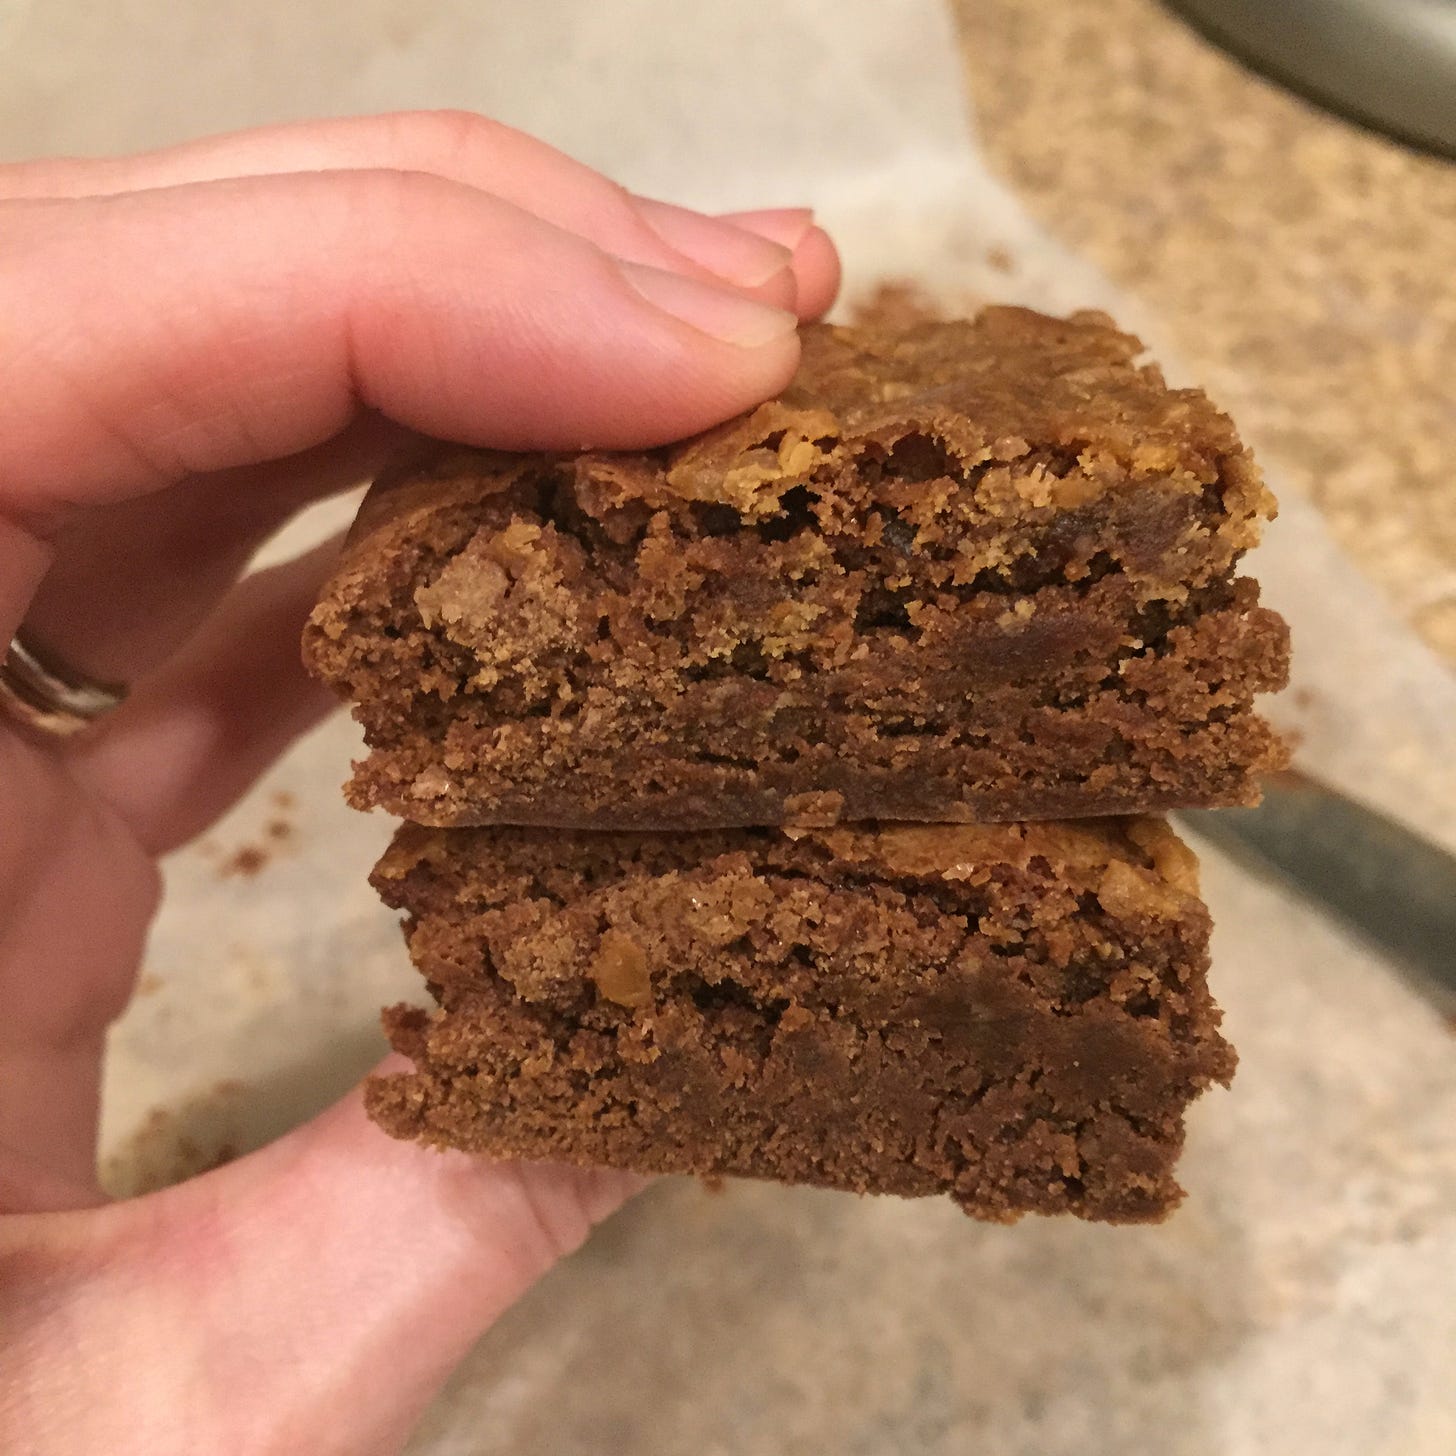 My hand holding two brownies stacked on top of each other. A knife and a piece of parchment paper can be seen in the background.